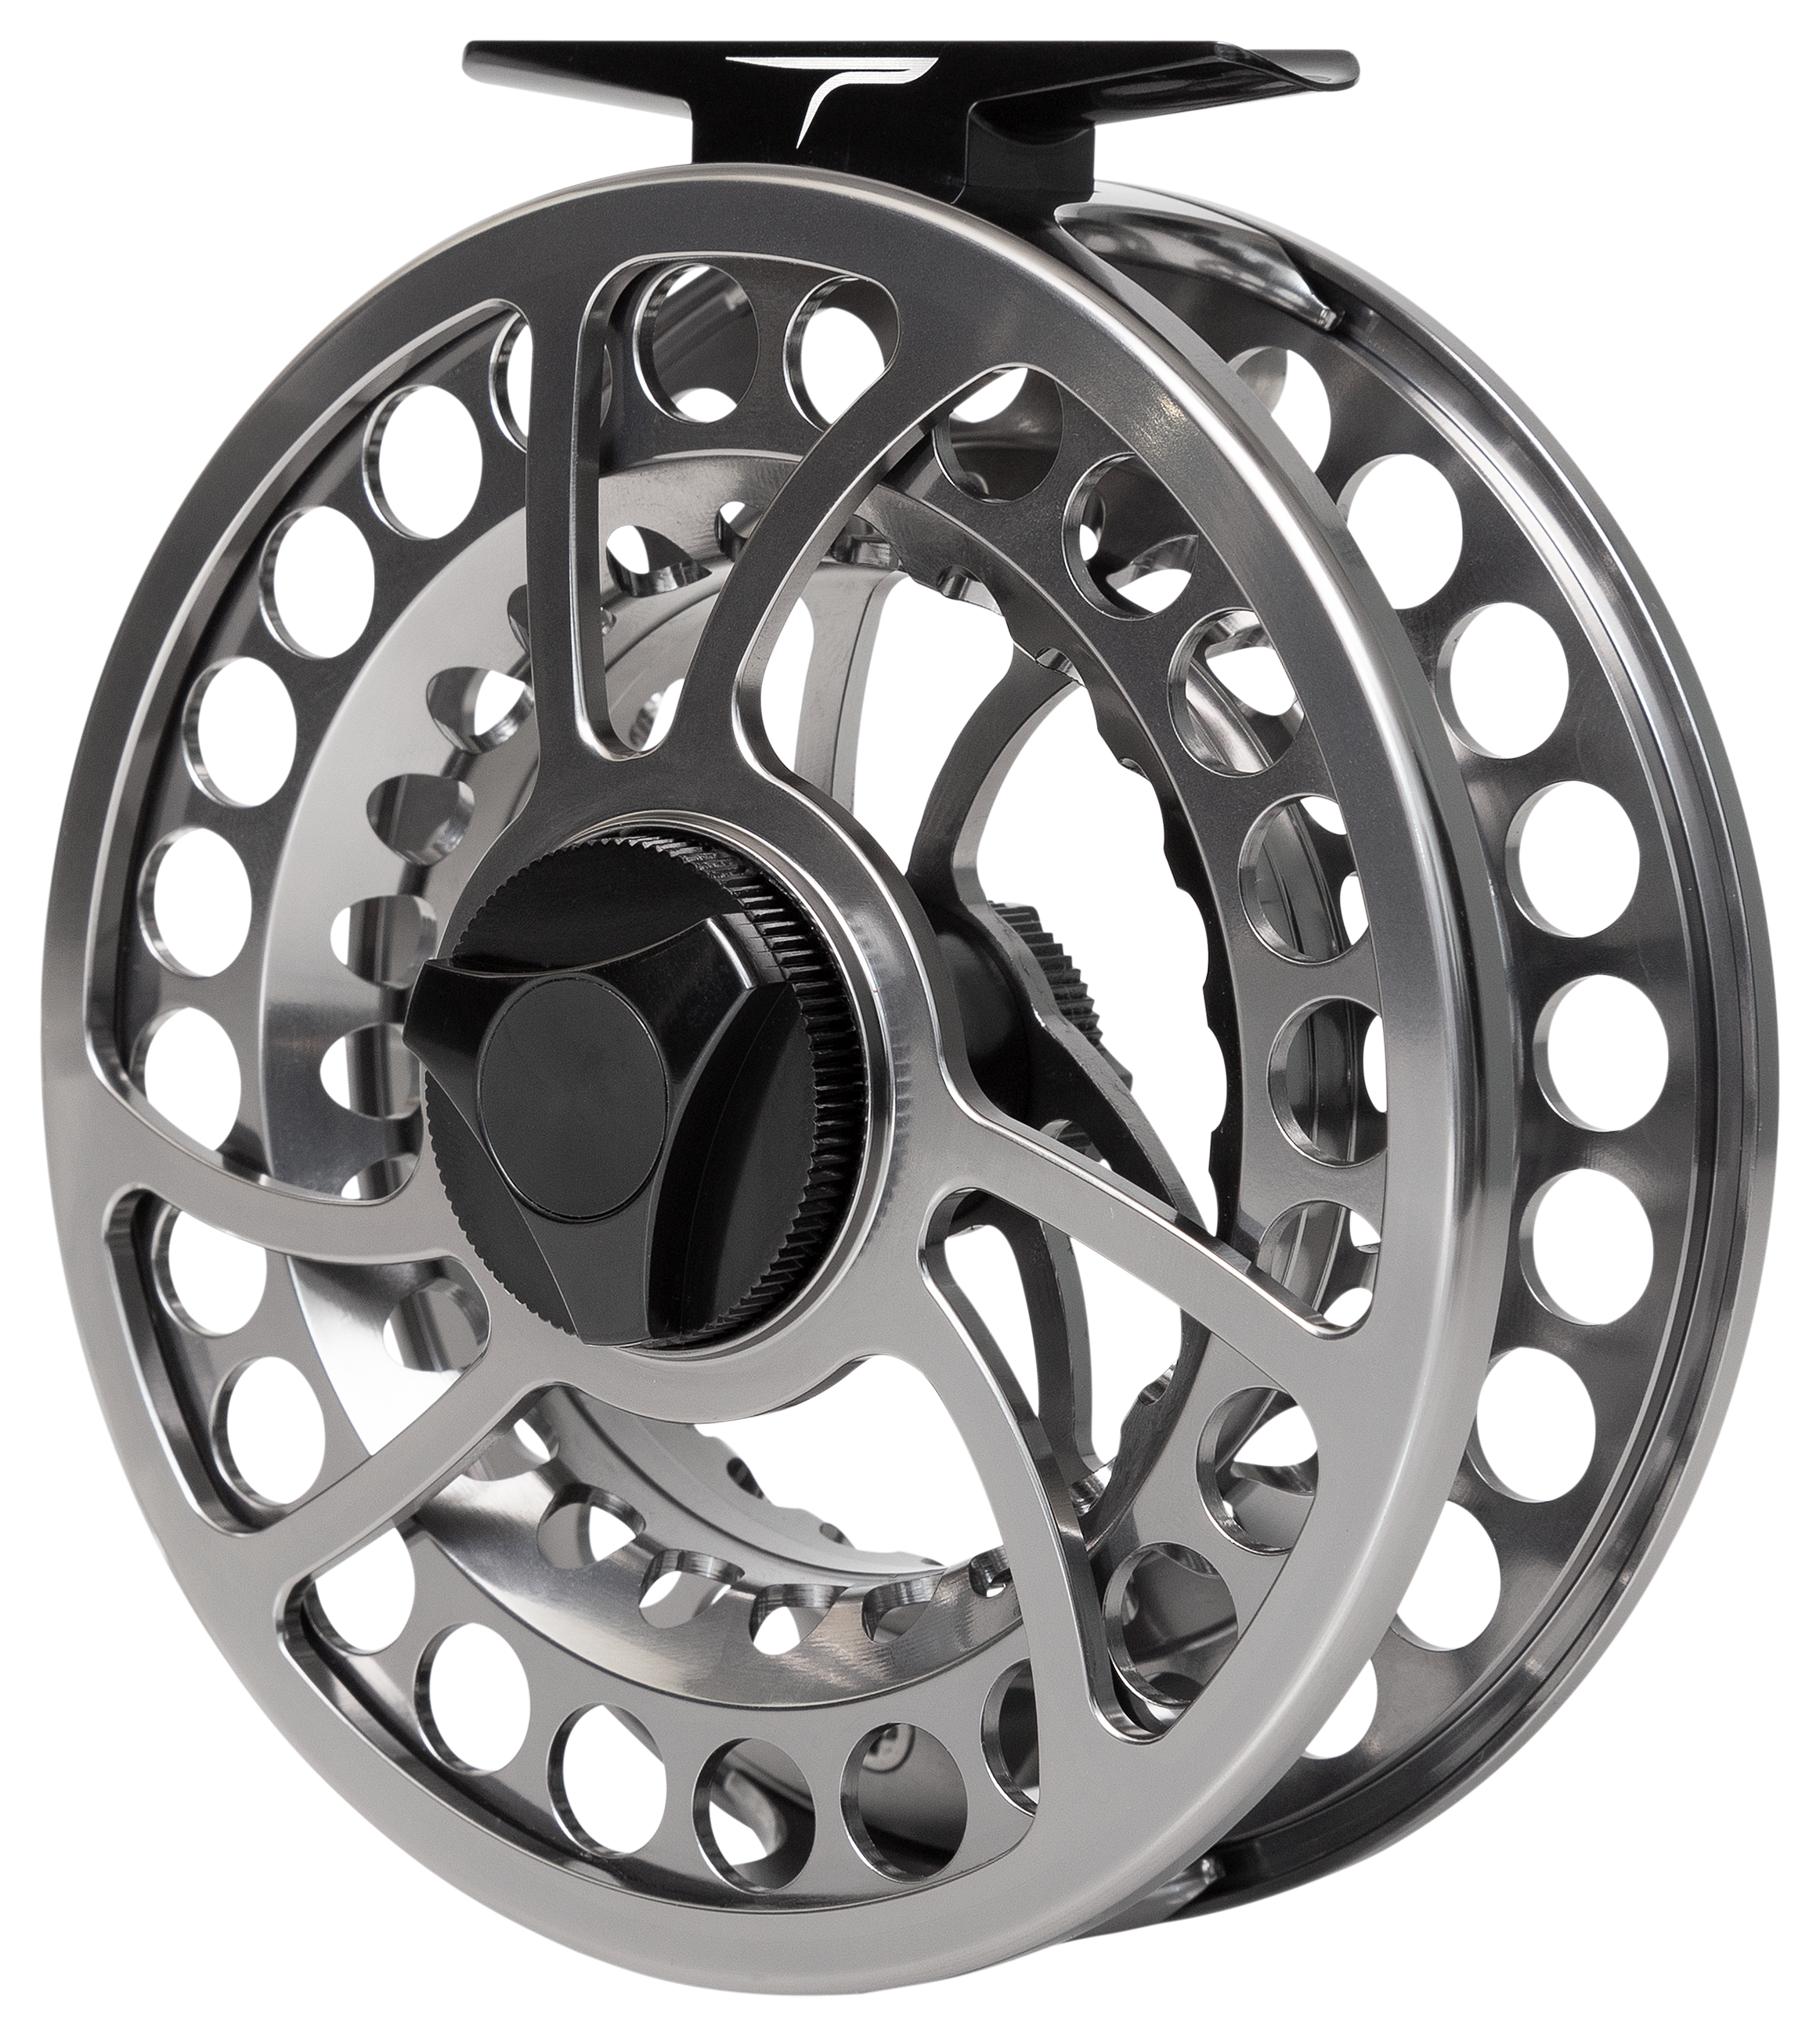 TFO BVK SD II FLY REEL, Temple Fork Outfitters BVK Sealed Drag Fly Reel